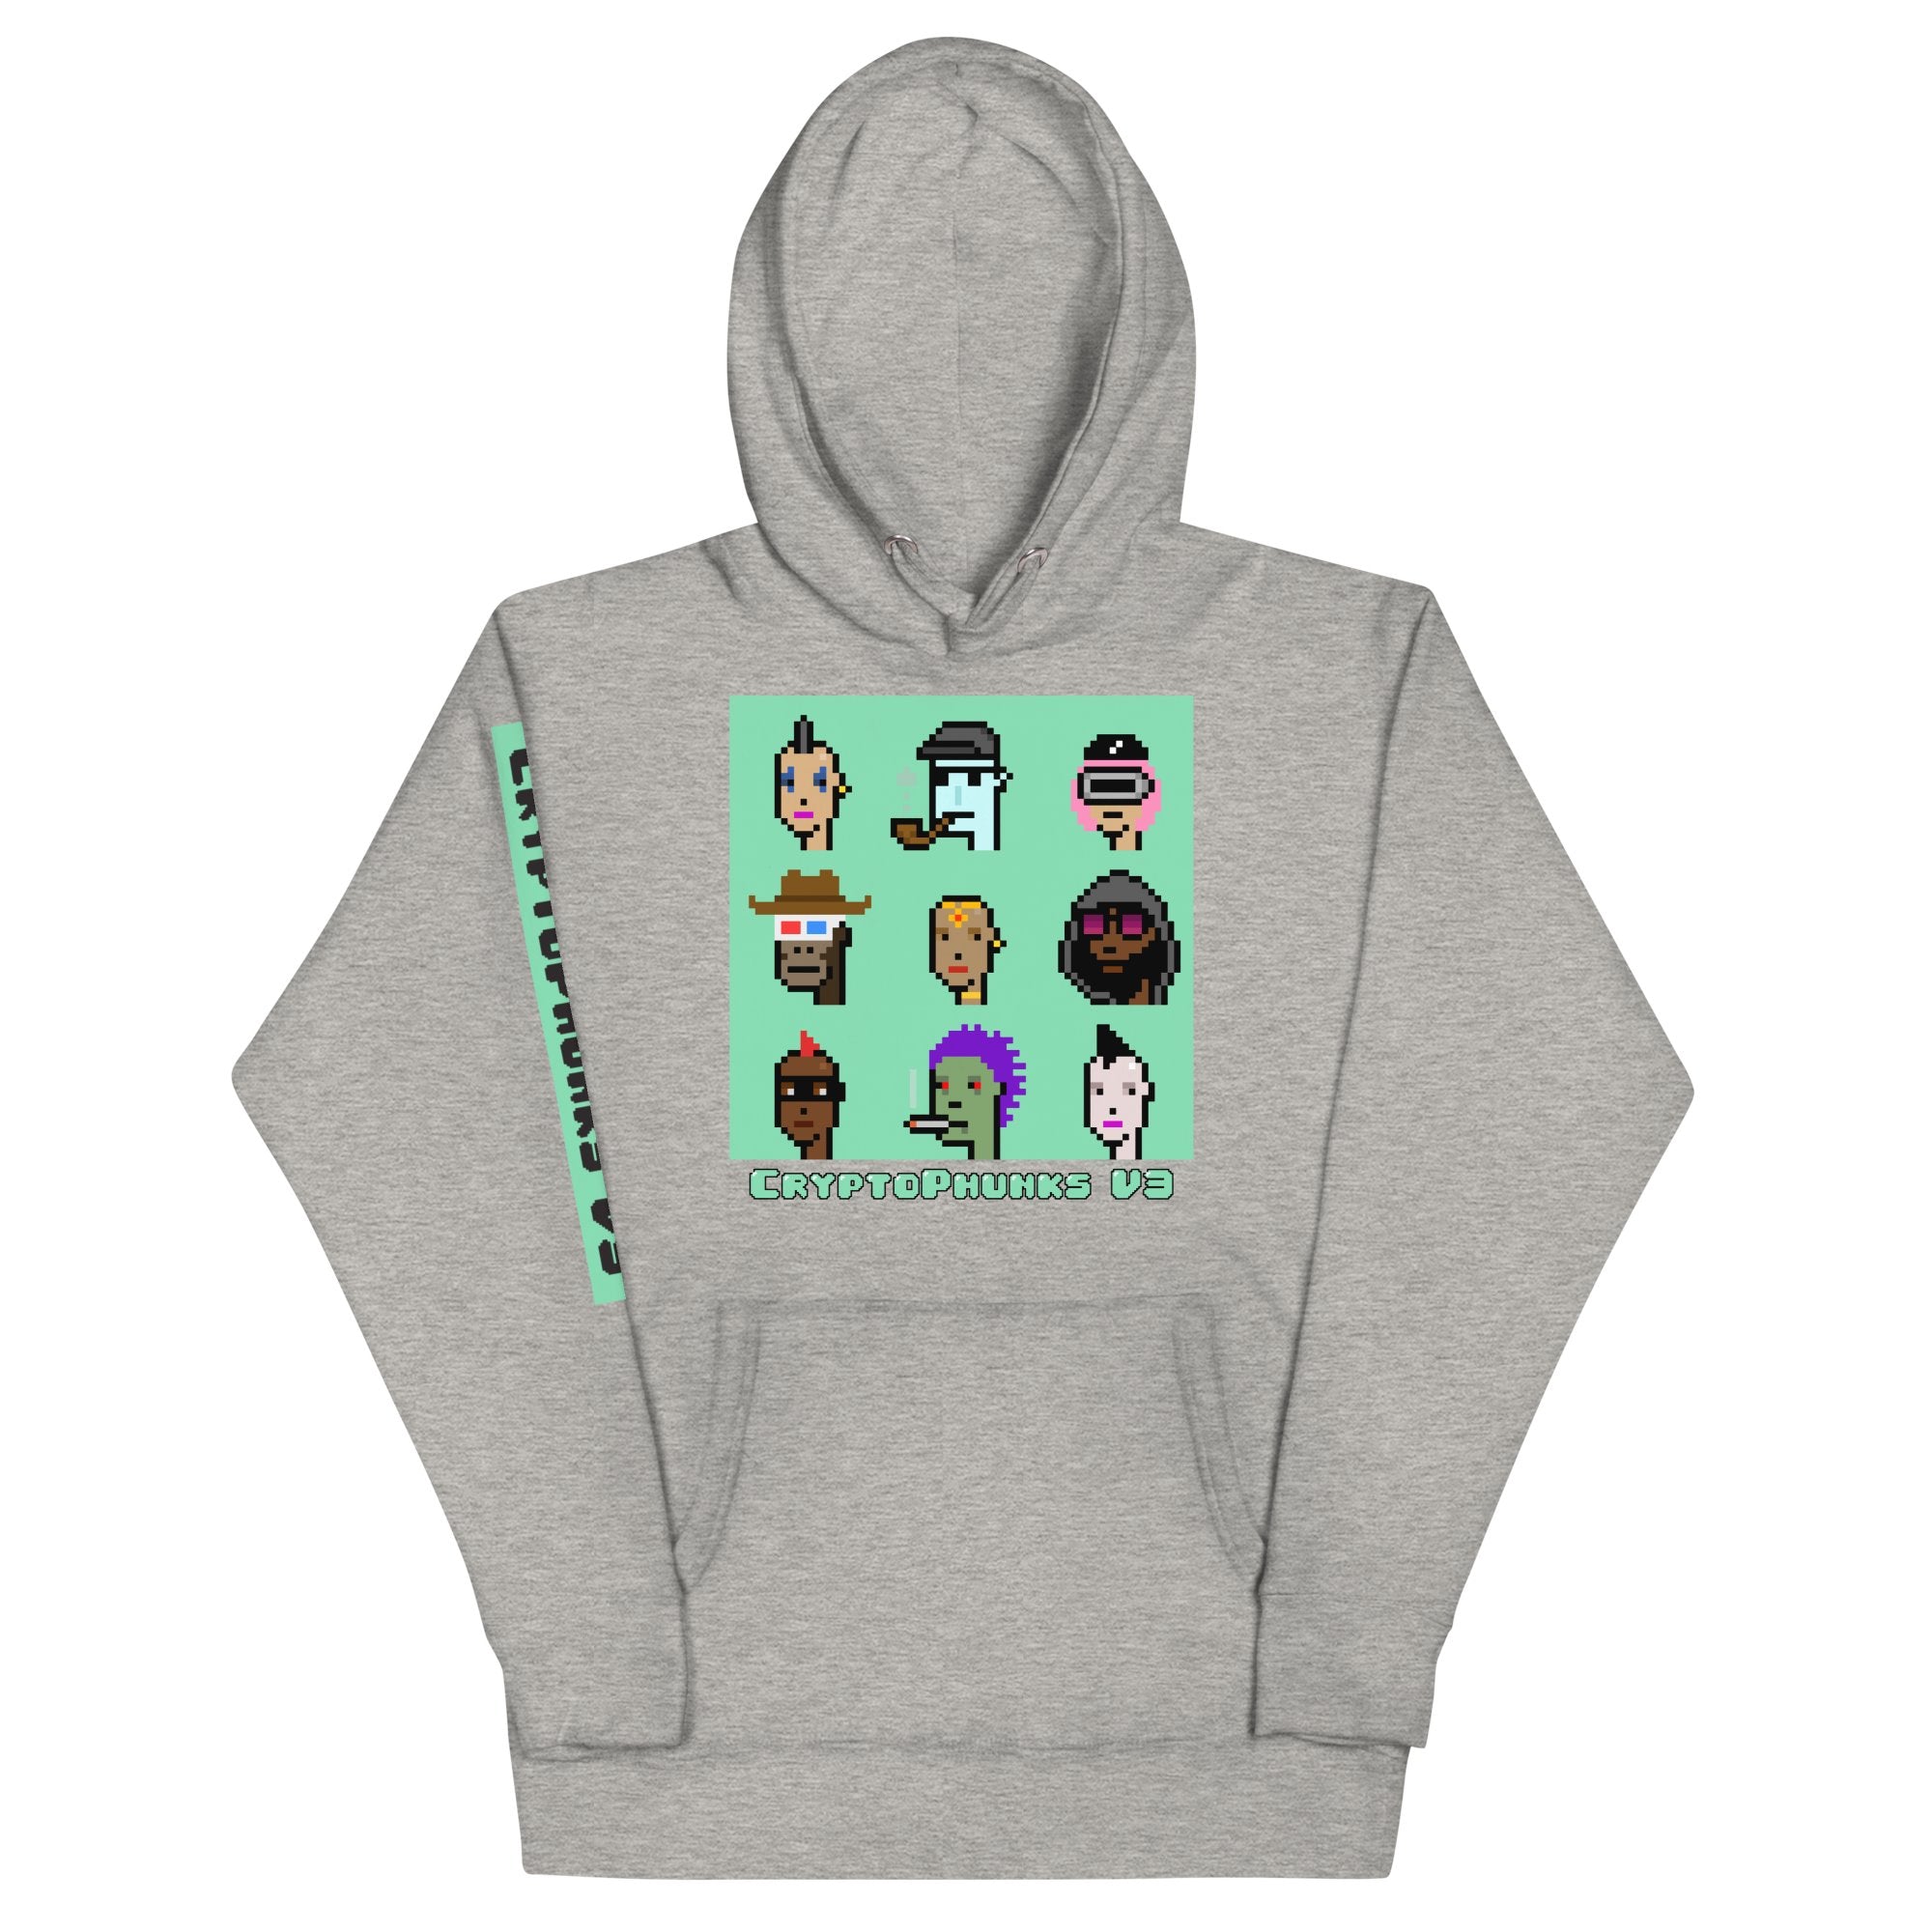 CryptoPhunks V3 Hoodie - Phunk Squad One on The Good Shop Online Store